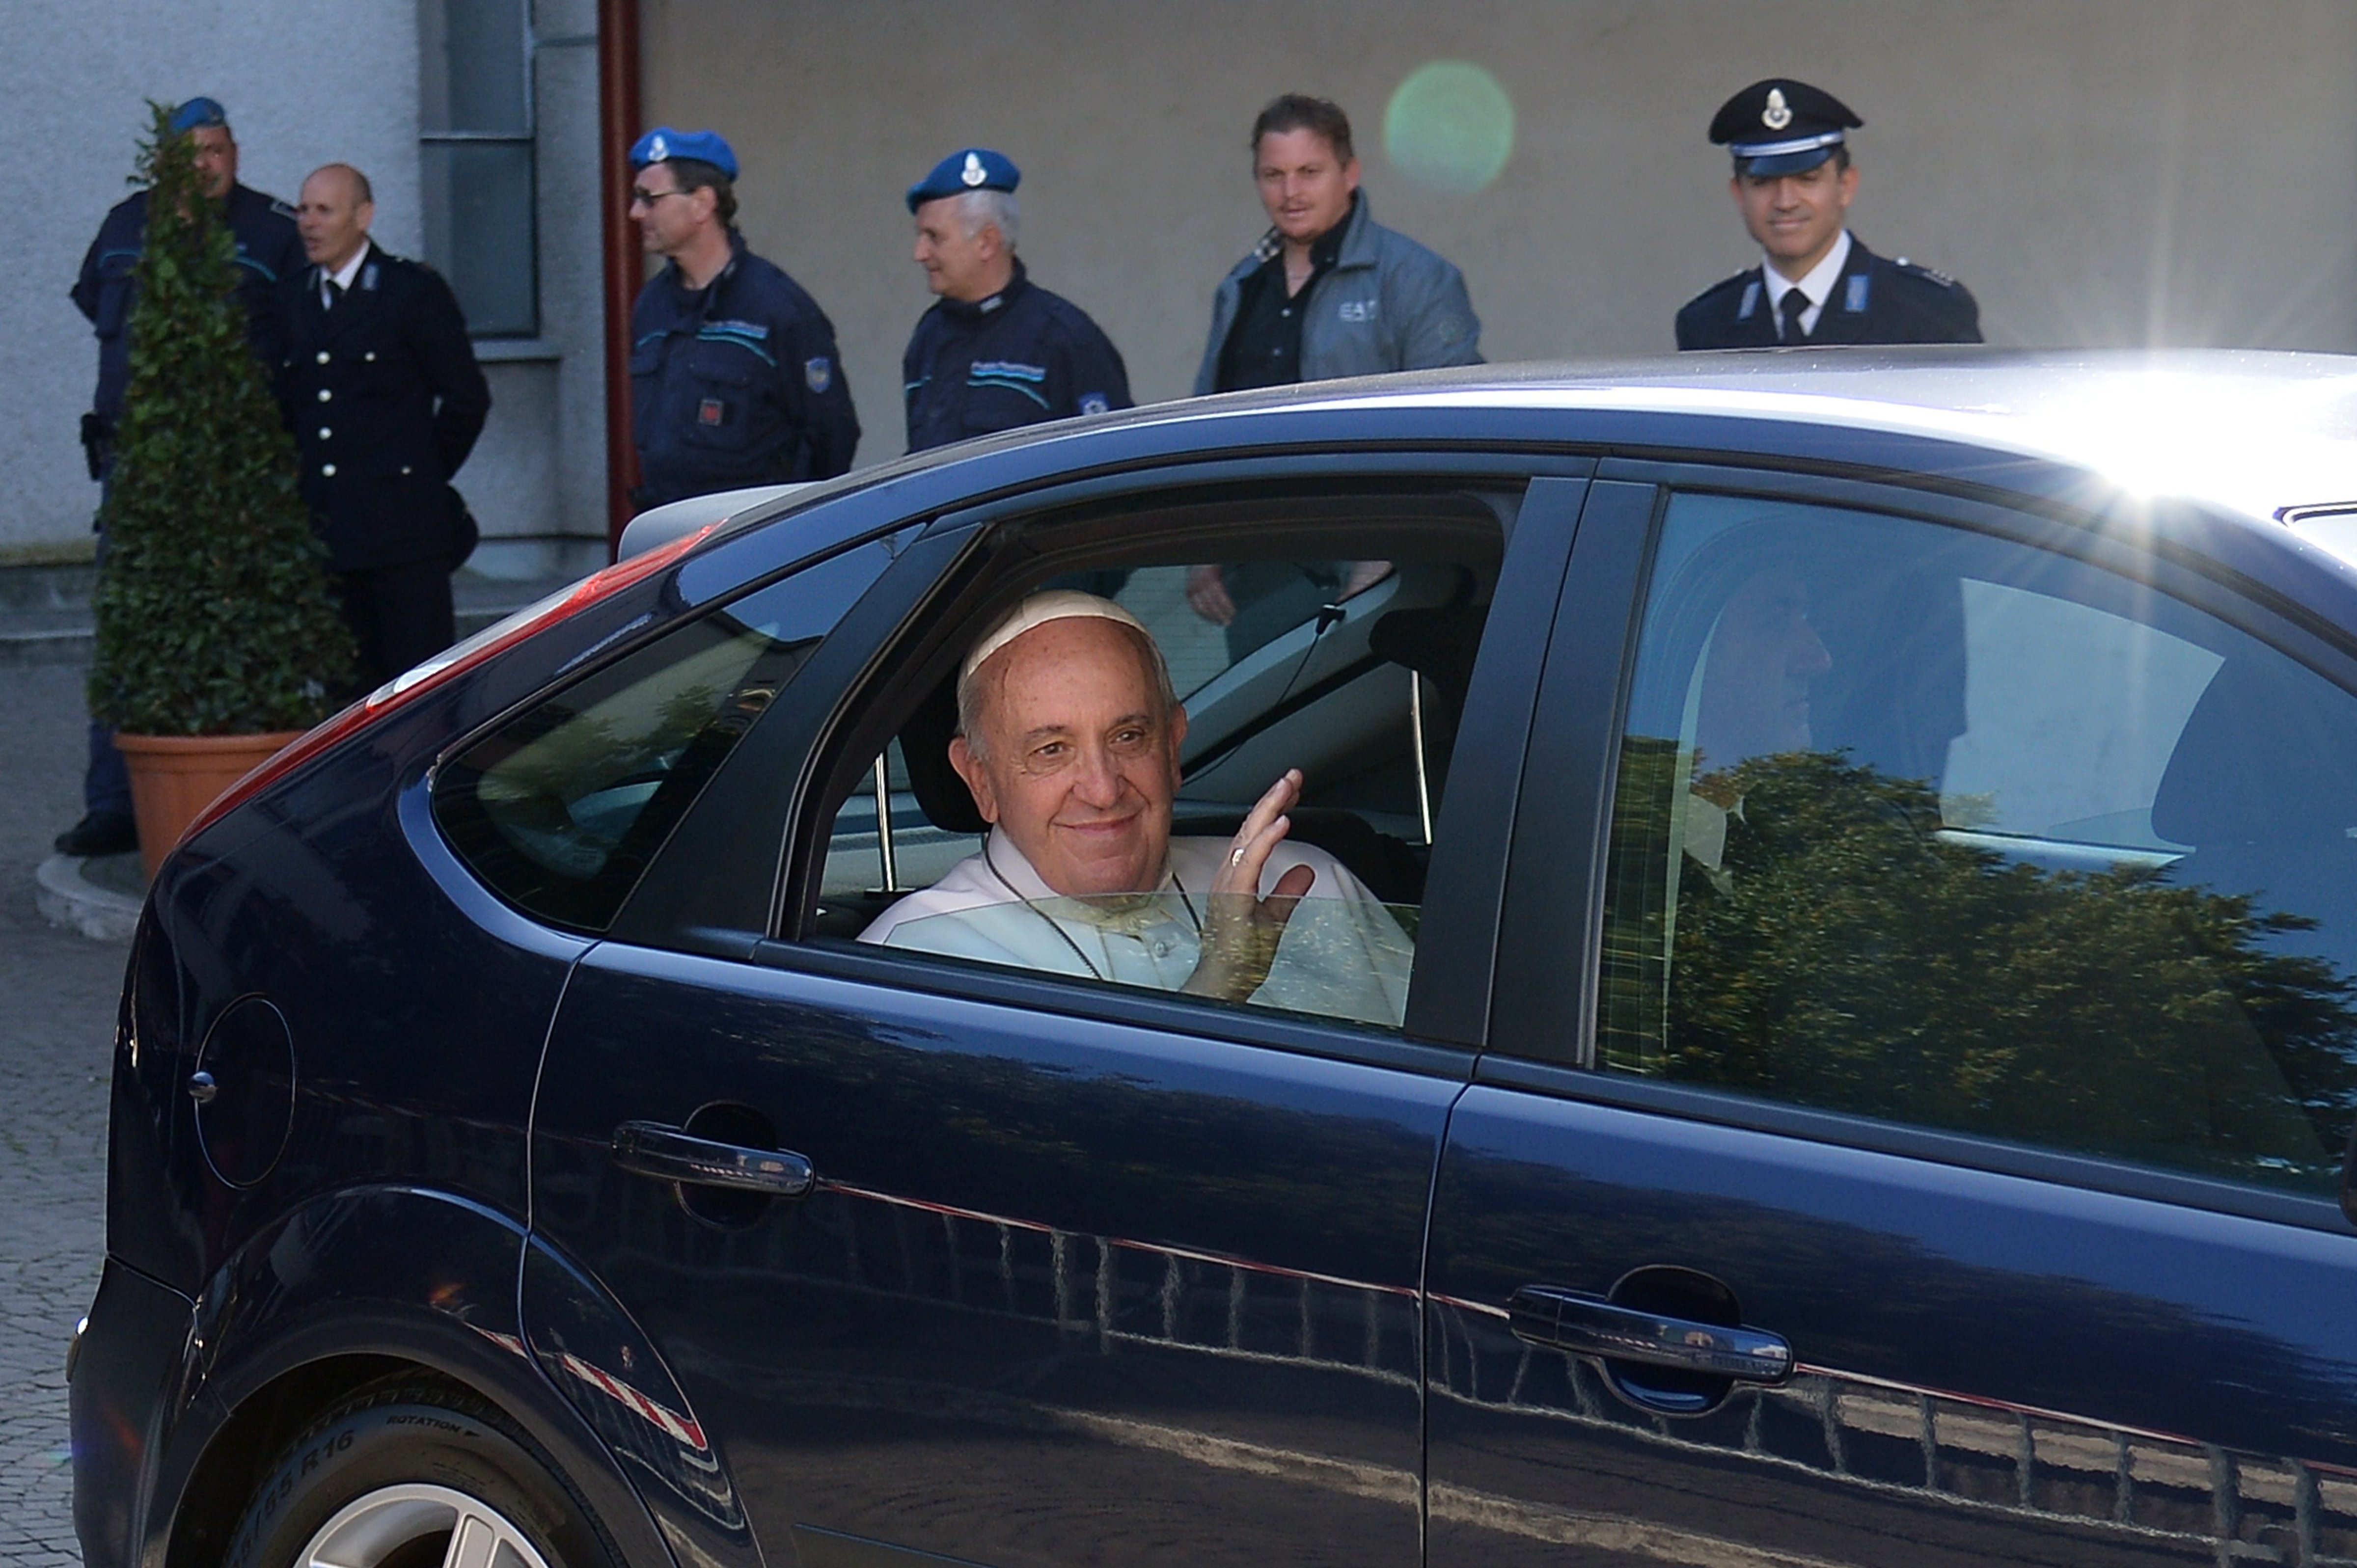 Pope Francis arrives by car at Rebibbia prison, where he washed the feet of prisoners in Rome, Italy on April 2, 2014. (Alberto Pizzoli—AFP/Getty Images)